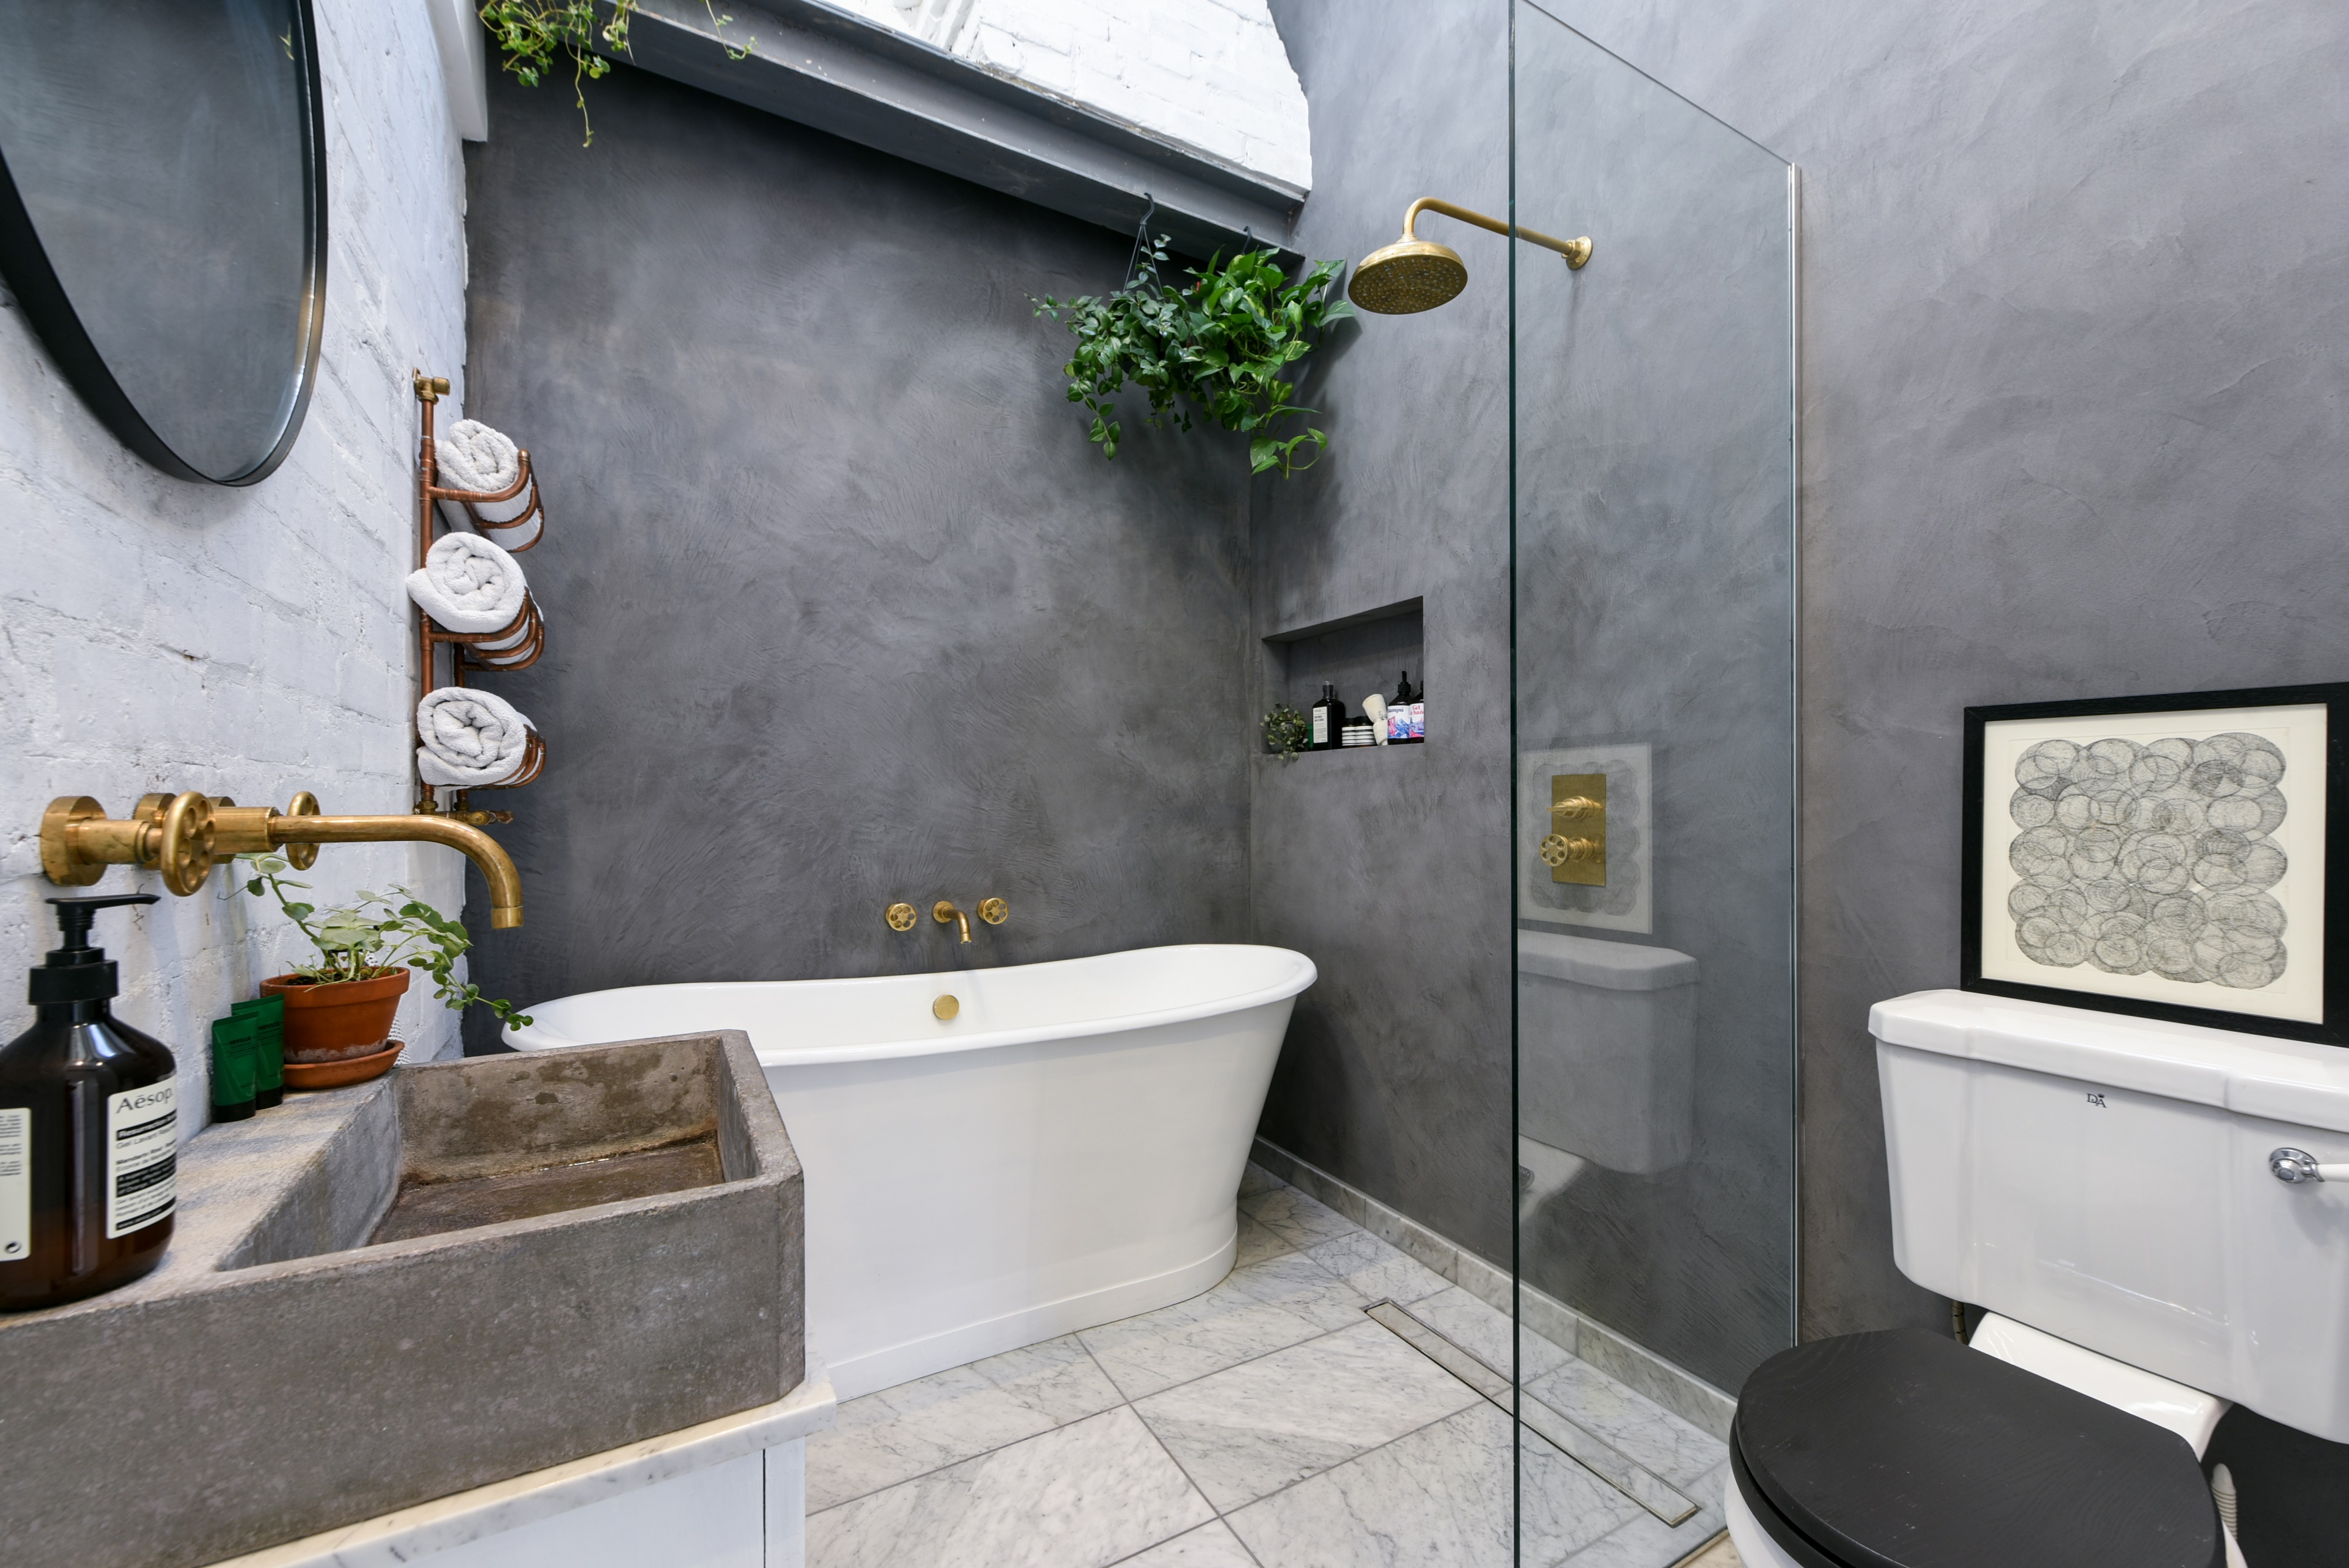 </p> <p>Find your ideal home design pro on designfor-me.com - get matched and see who's interested in your home project. Click image to see more inspiration from our design pros</p> <p>Design by Stephen, interior designer from Hackney, London</p> <p> #interiordesign #interiors #homedecor #homeinspiration #bathrooms #bathroomdesign #bathroominspiration #bathroomideas </p> <p>